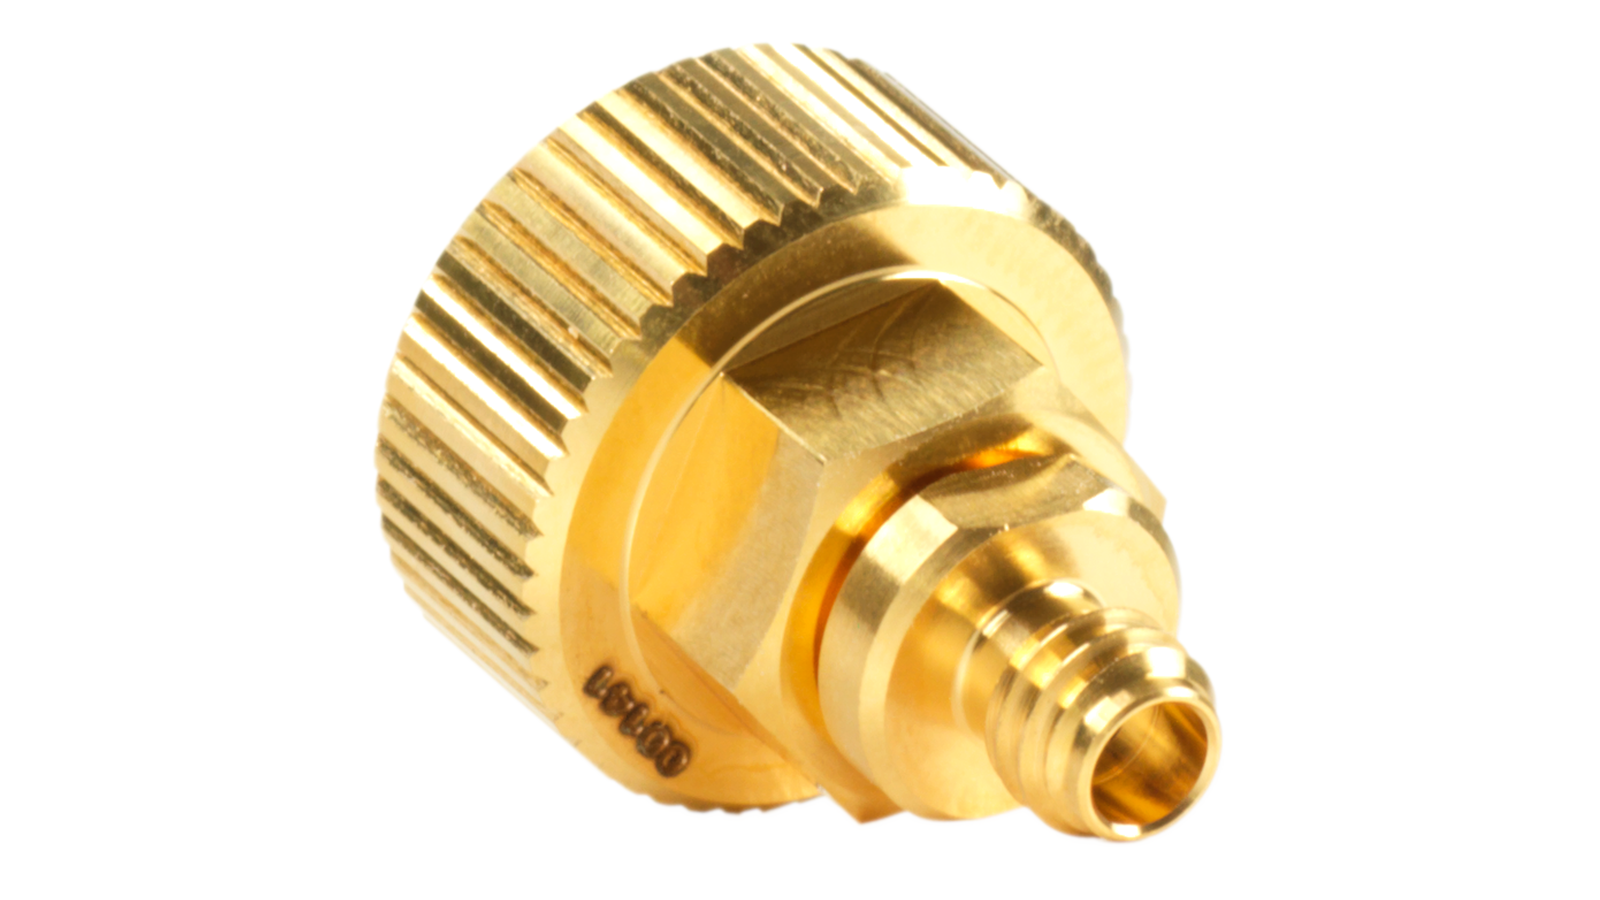 Y1900B precision 1.0 millimeter coax-to-ruggedized-coax adapter